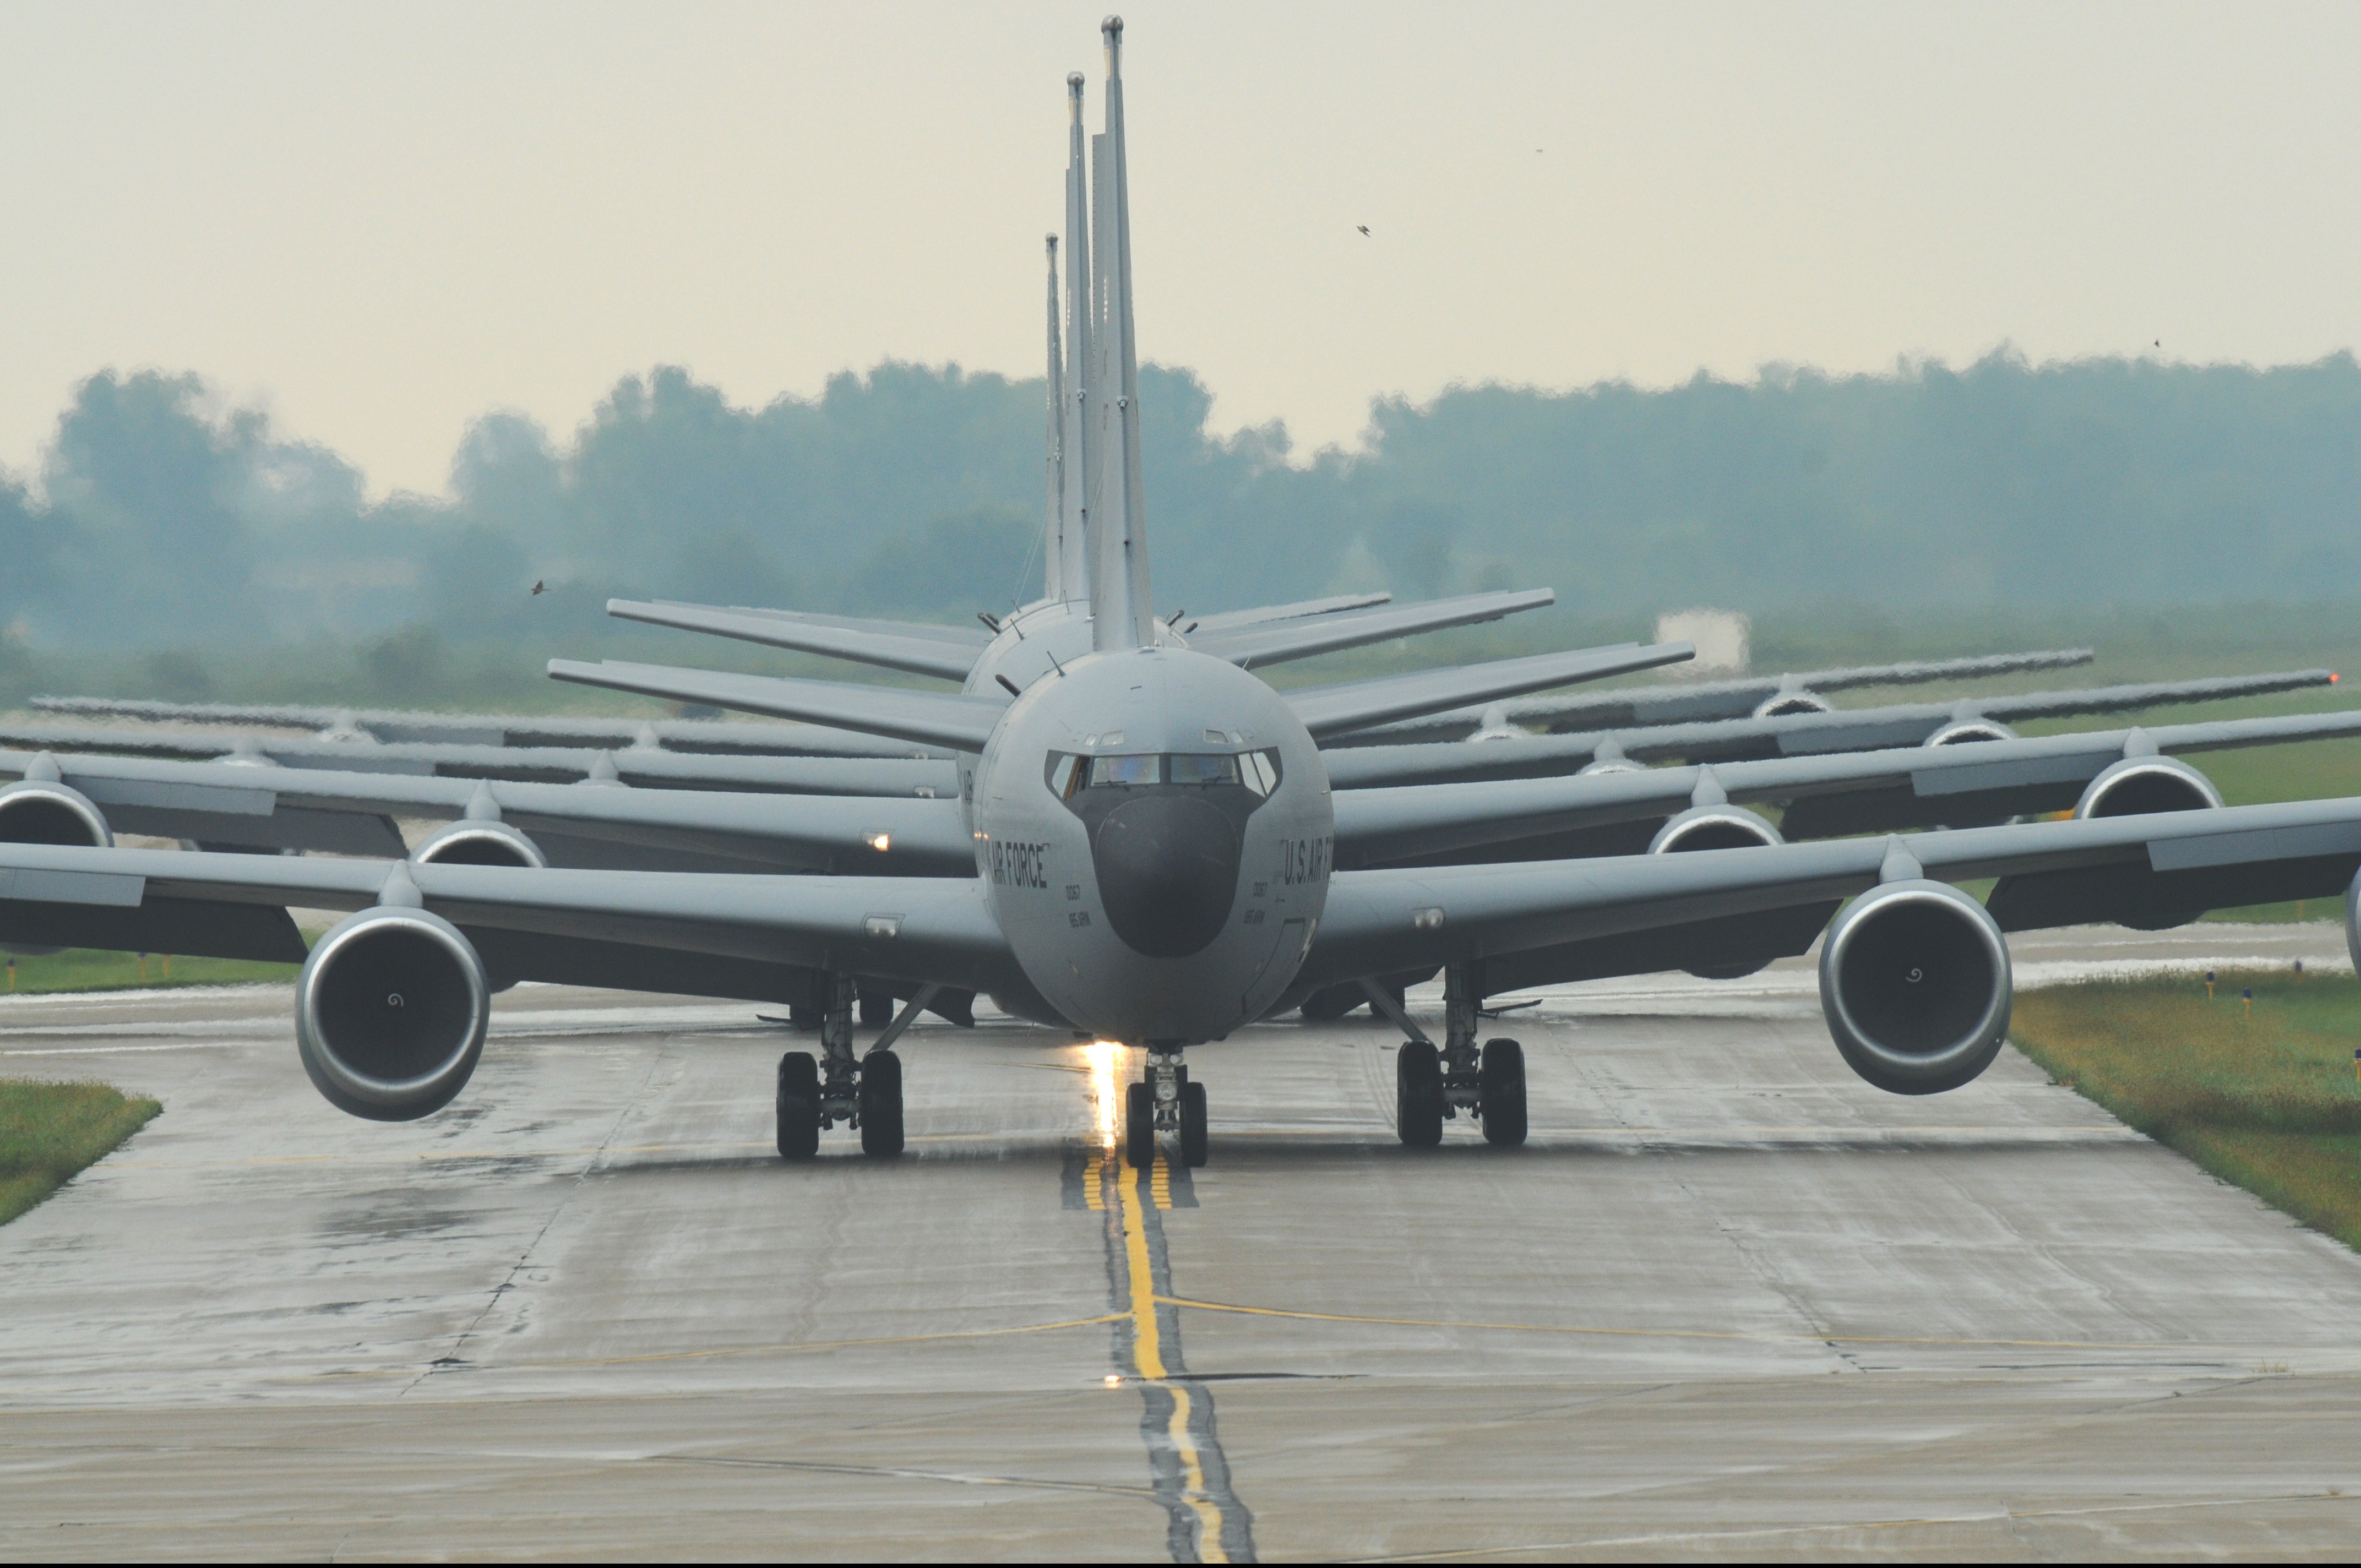 Military jets on the runway photo